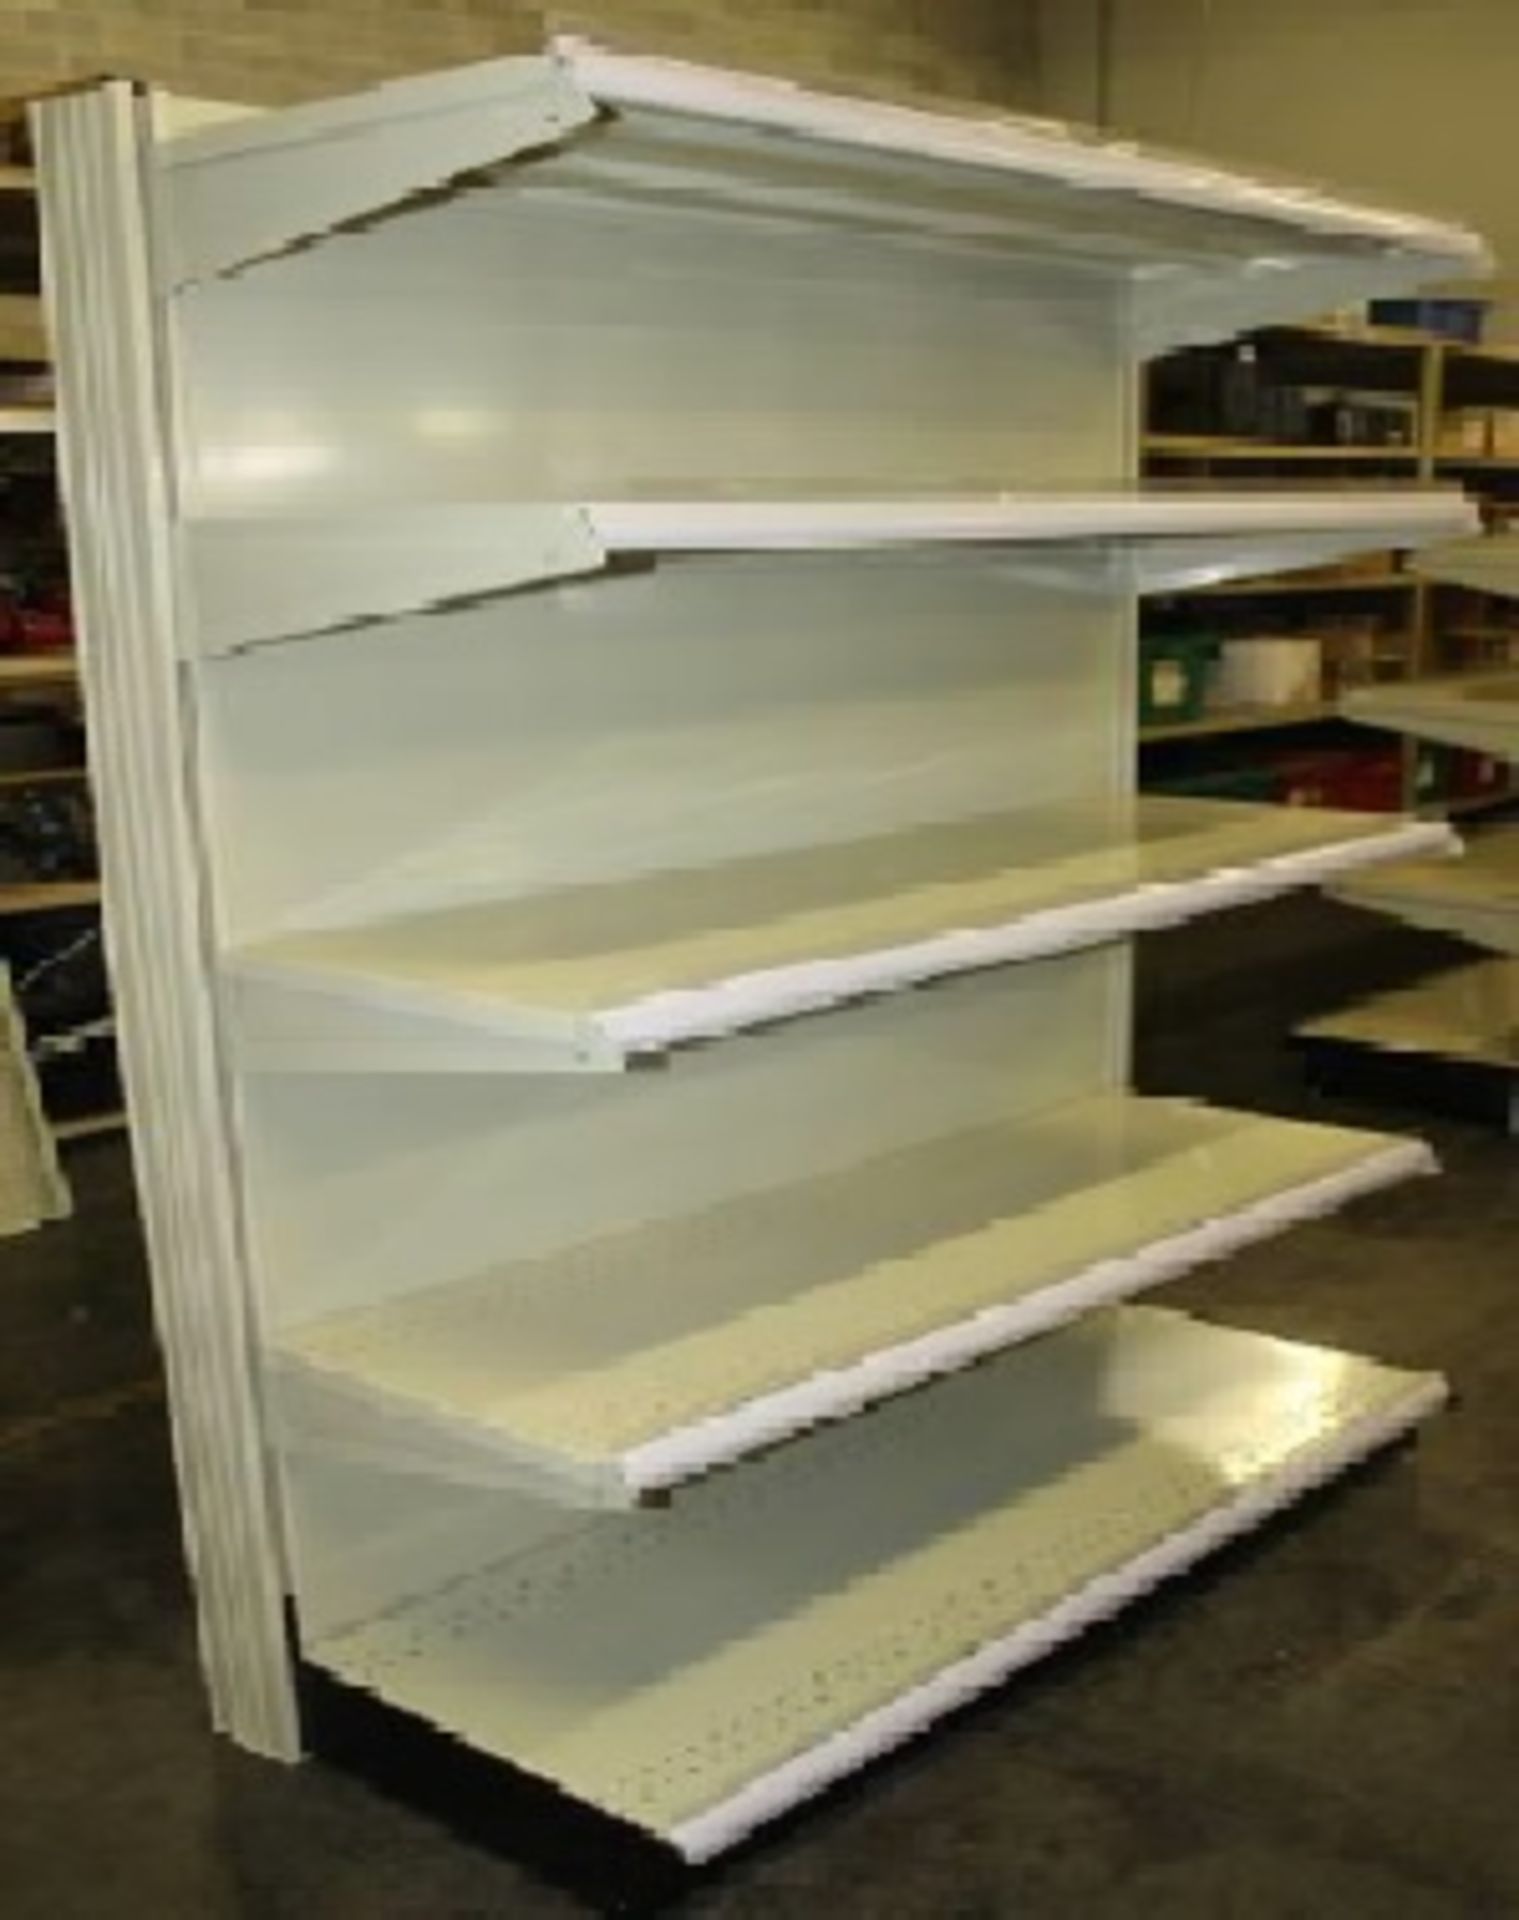 5 SECTIONS OF GONDOLA SHELVING WITH 4 SHELVES LEVEL DOUBLE SIDED - Image 2 of 2